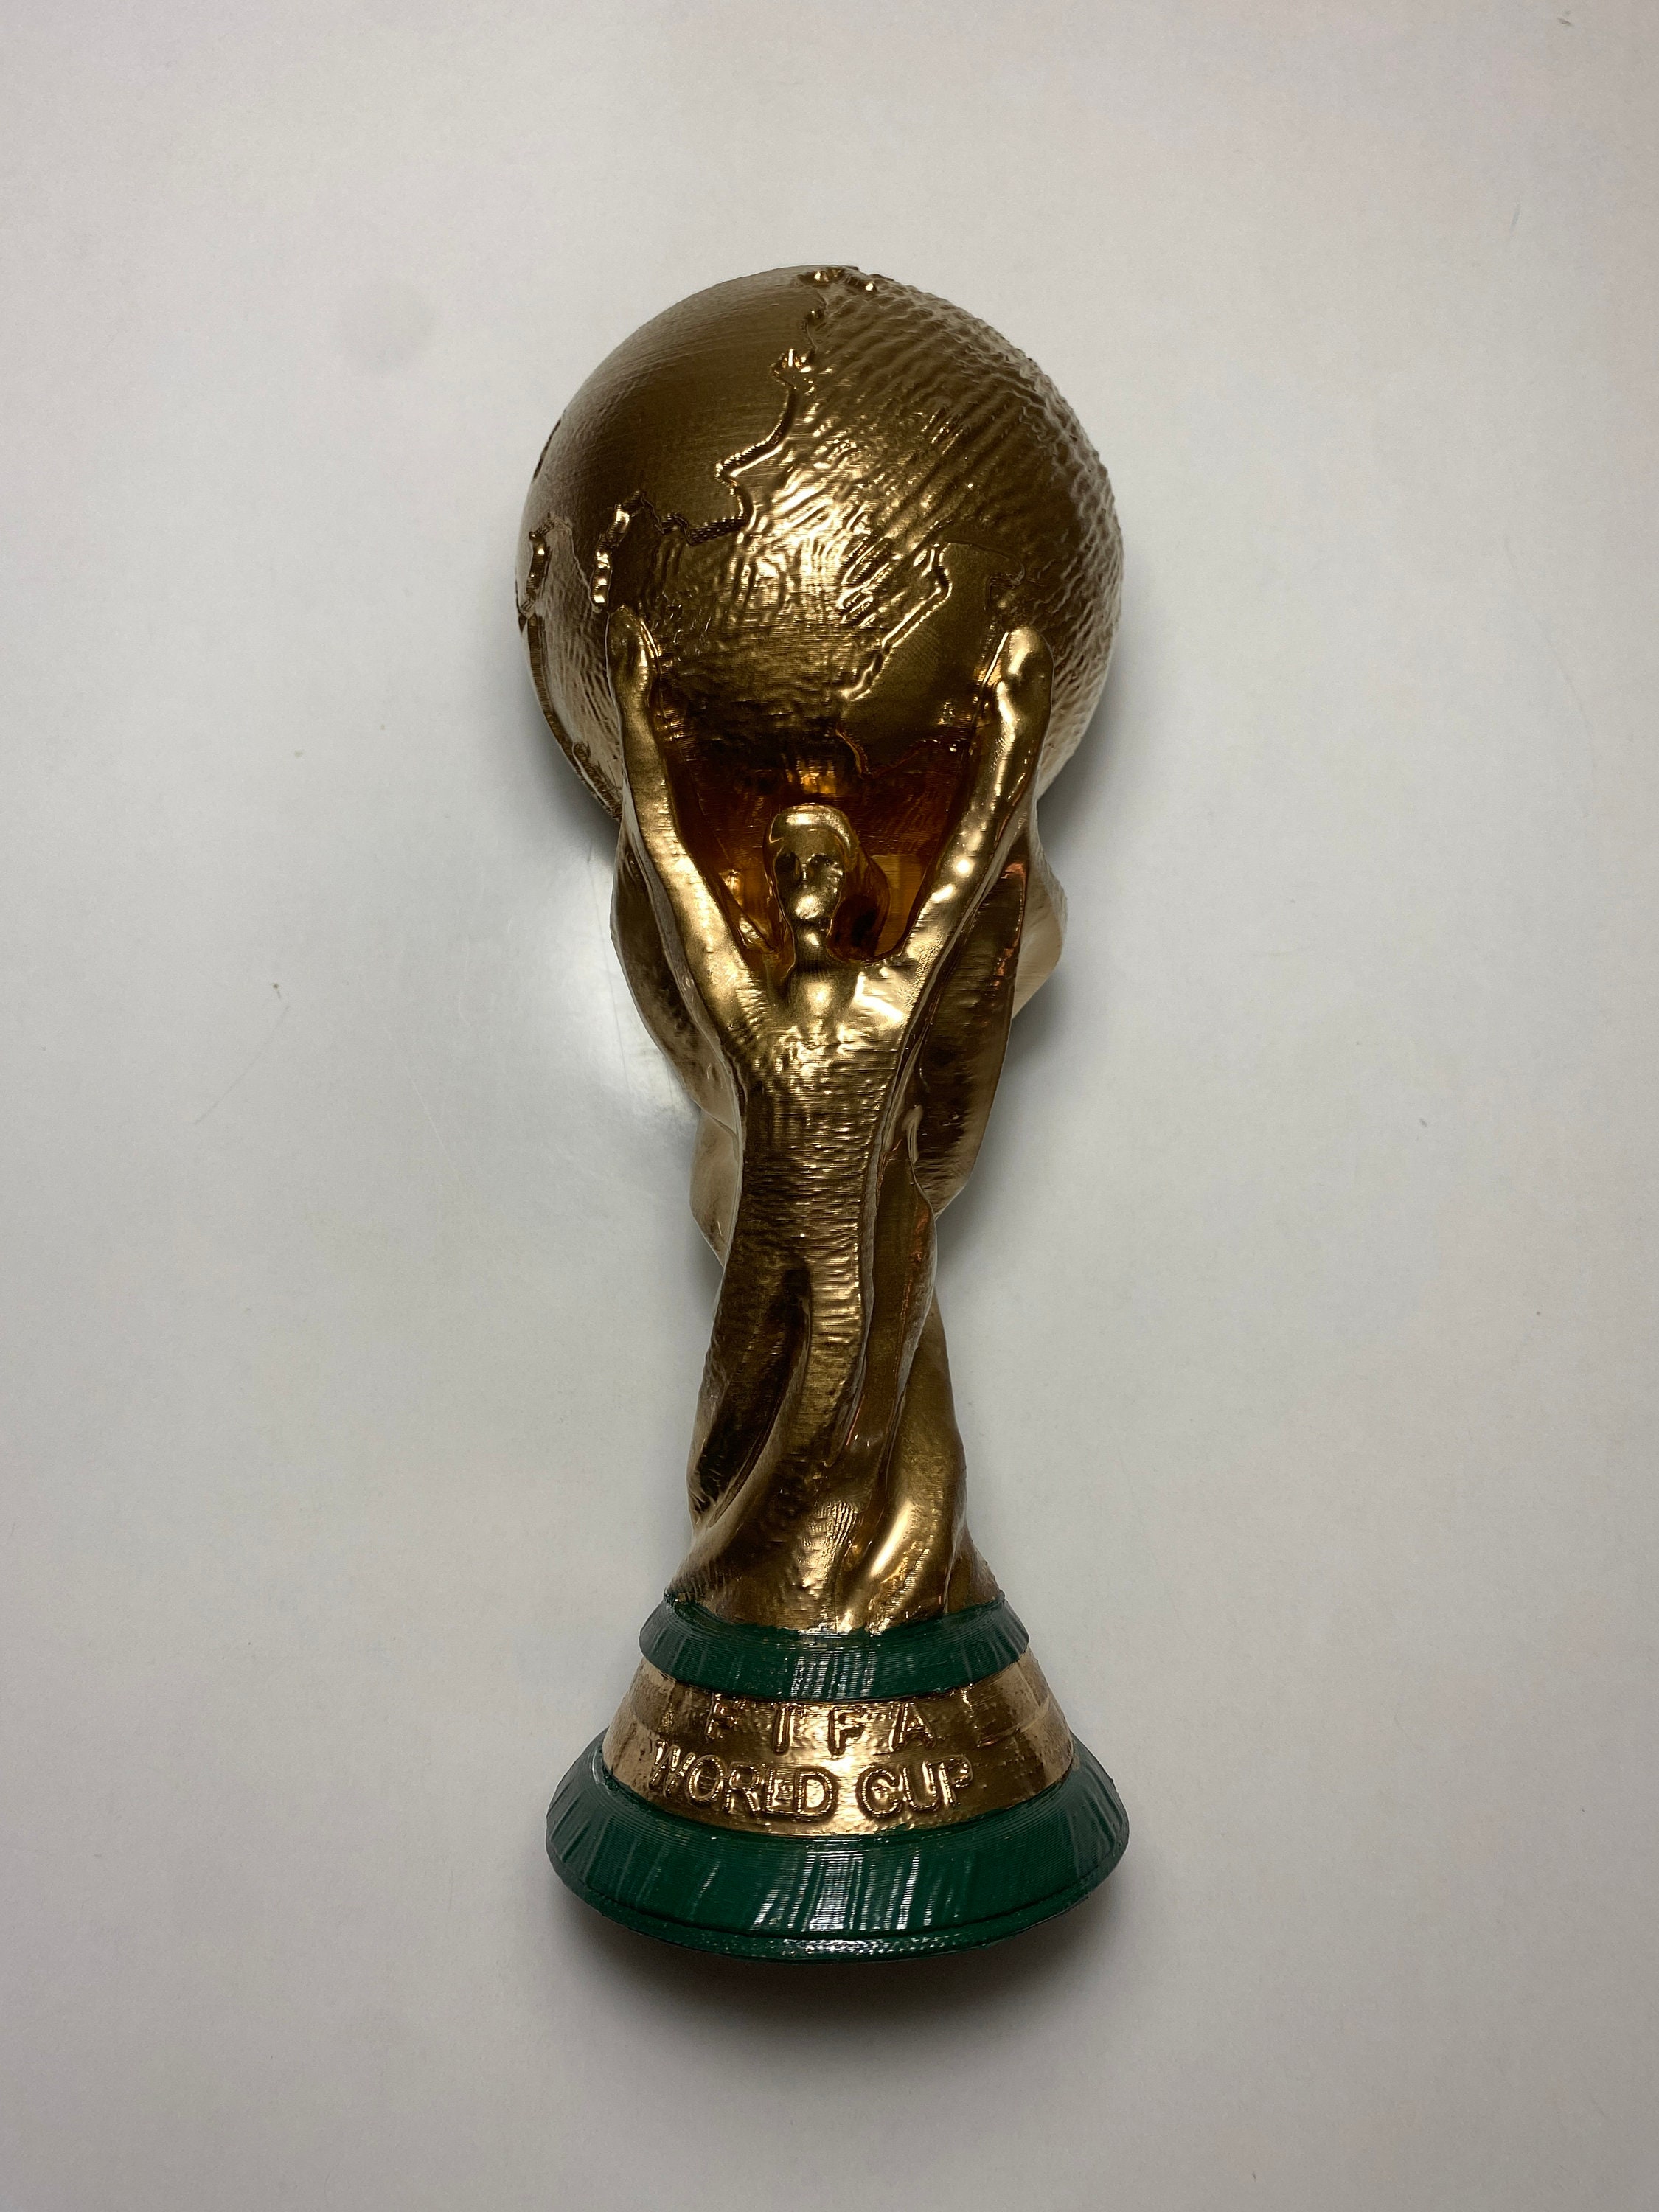 FIFA World Cup Trophy Replica in an Acrylic Case (Trophy Size 40